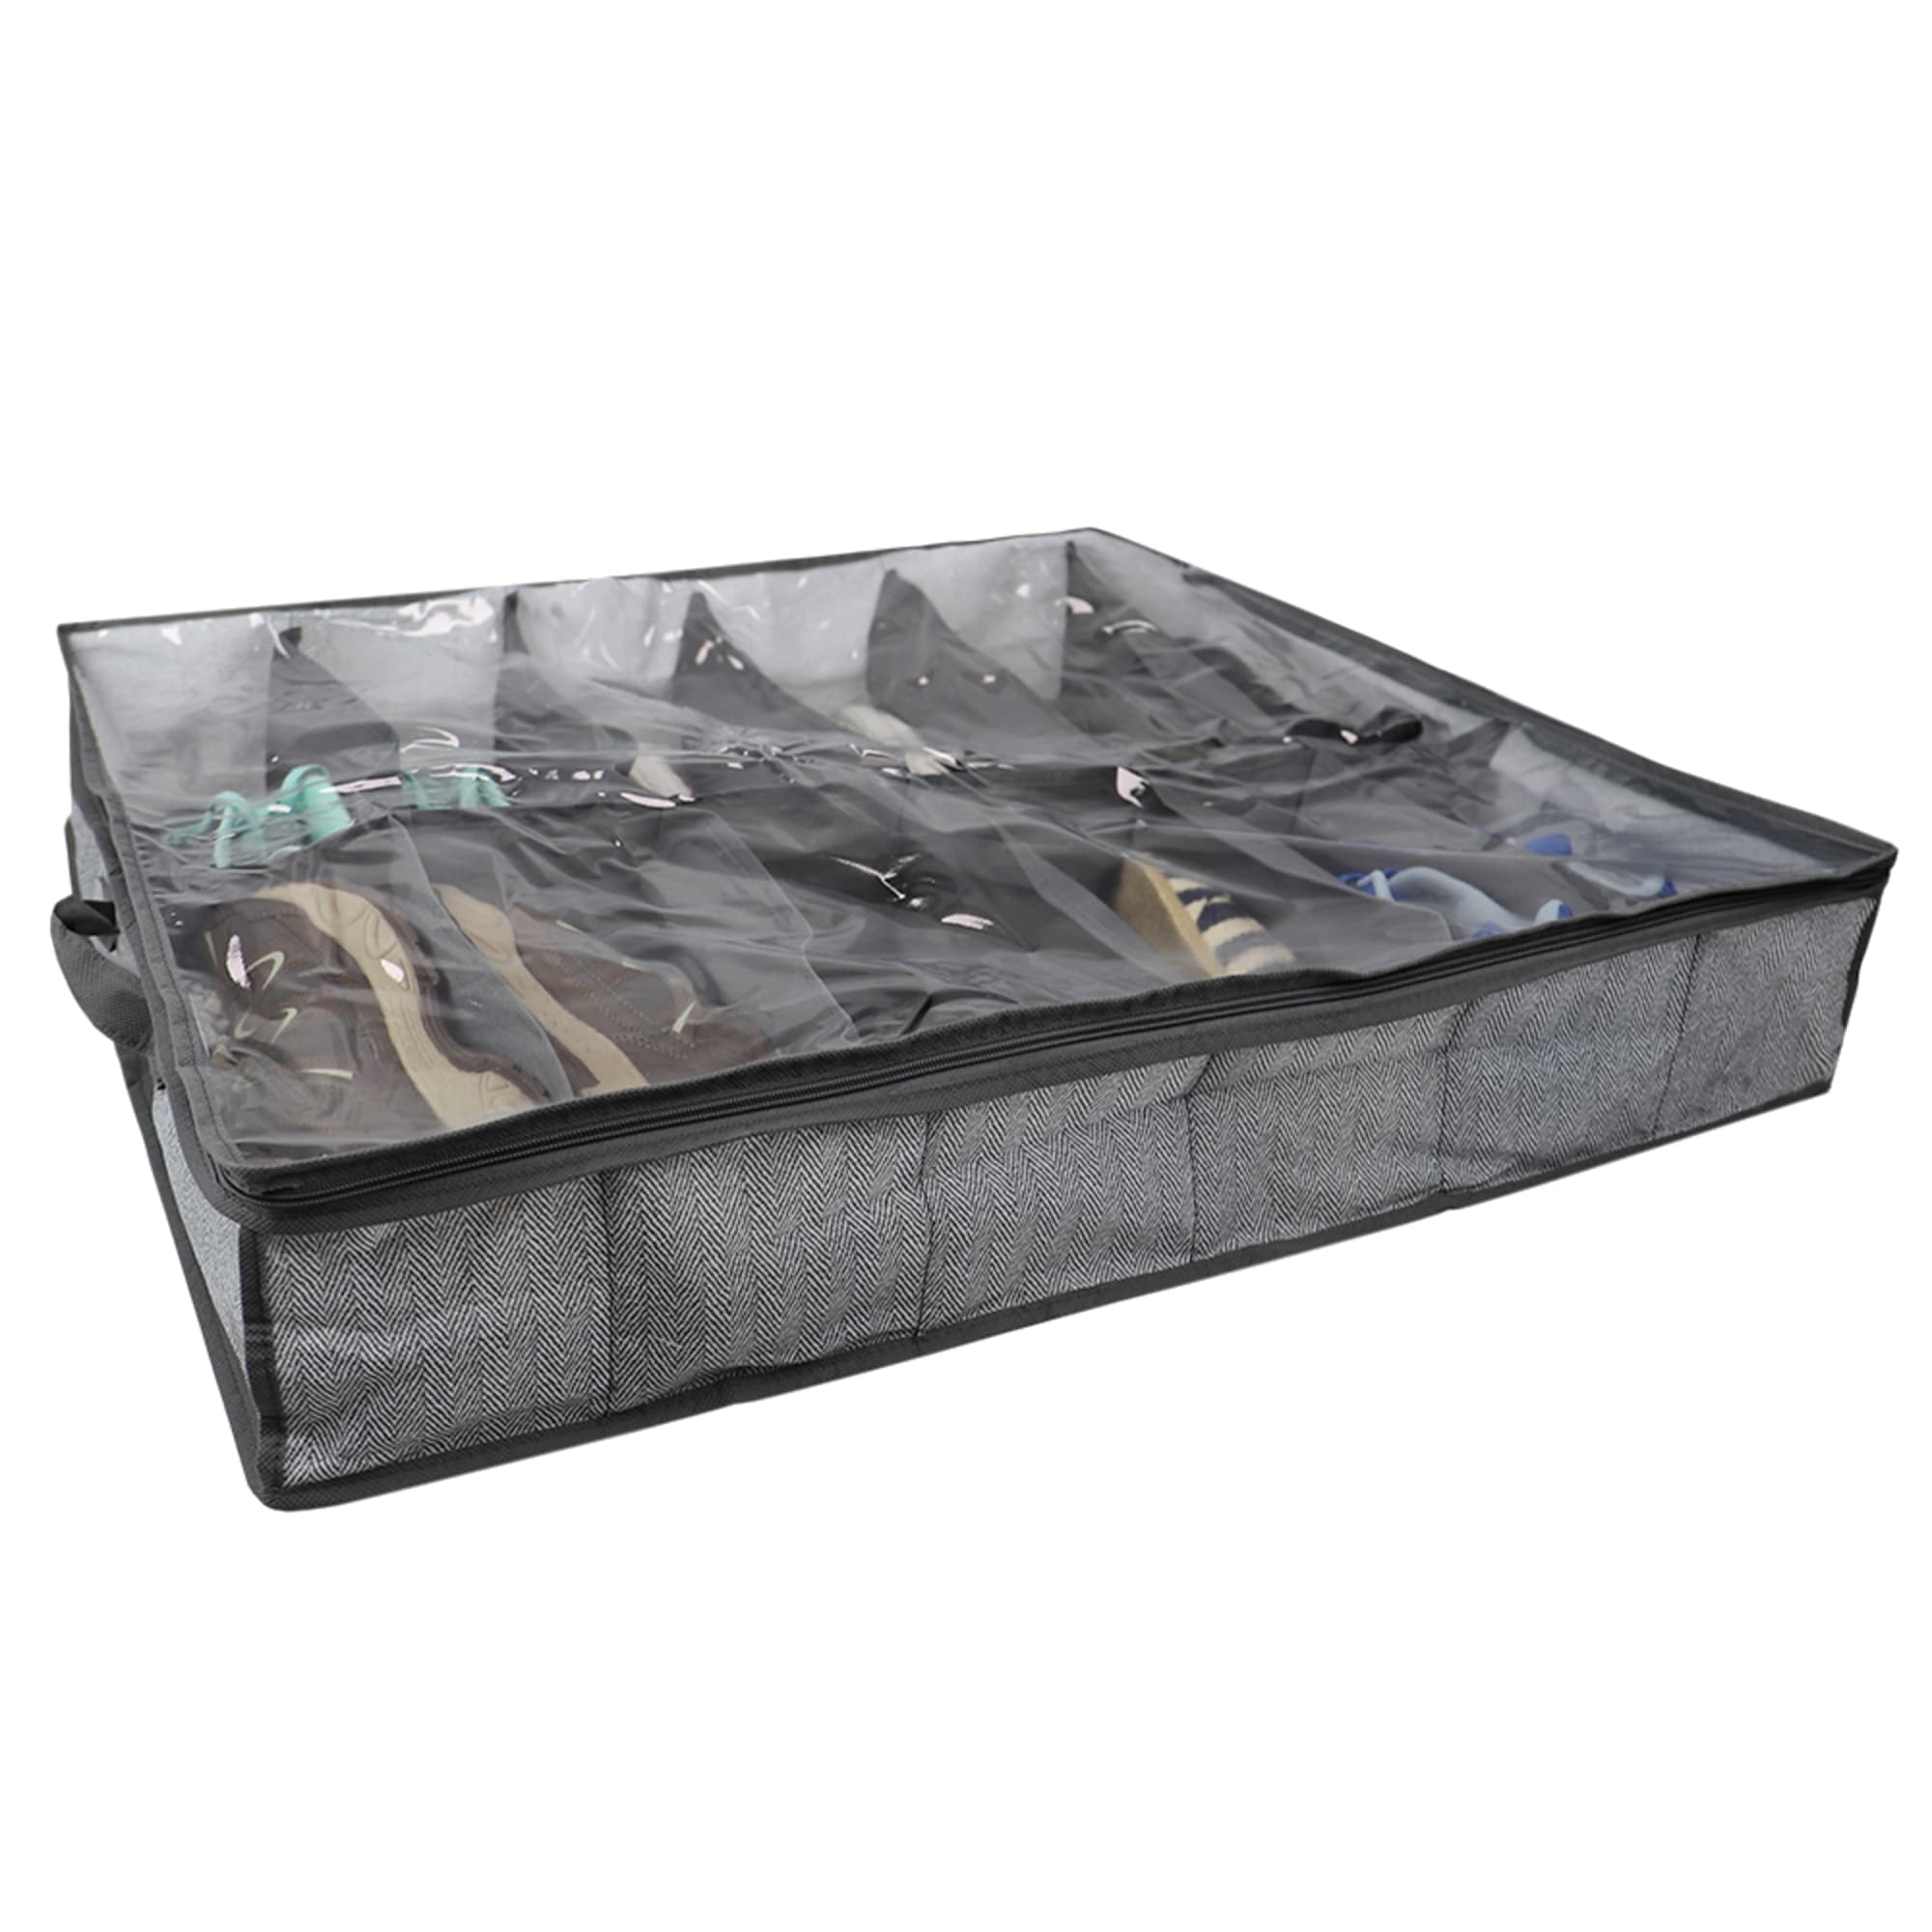 Home Basics 12 Pair Herringbone Pattern Non-woven Under the Bed Shoe Organizer, Grey $5.00 EACH, CASE PACK OF 12